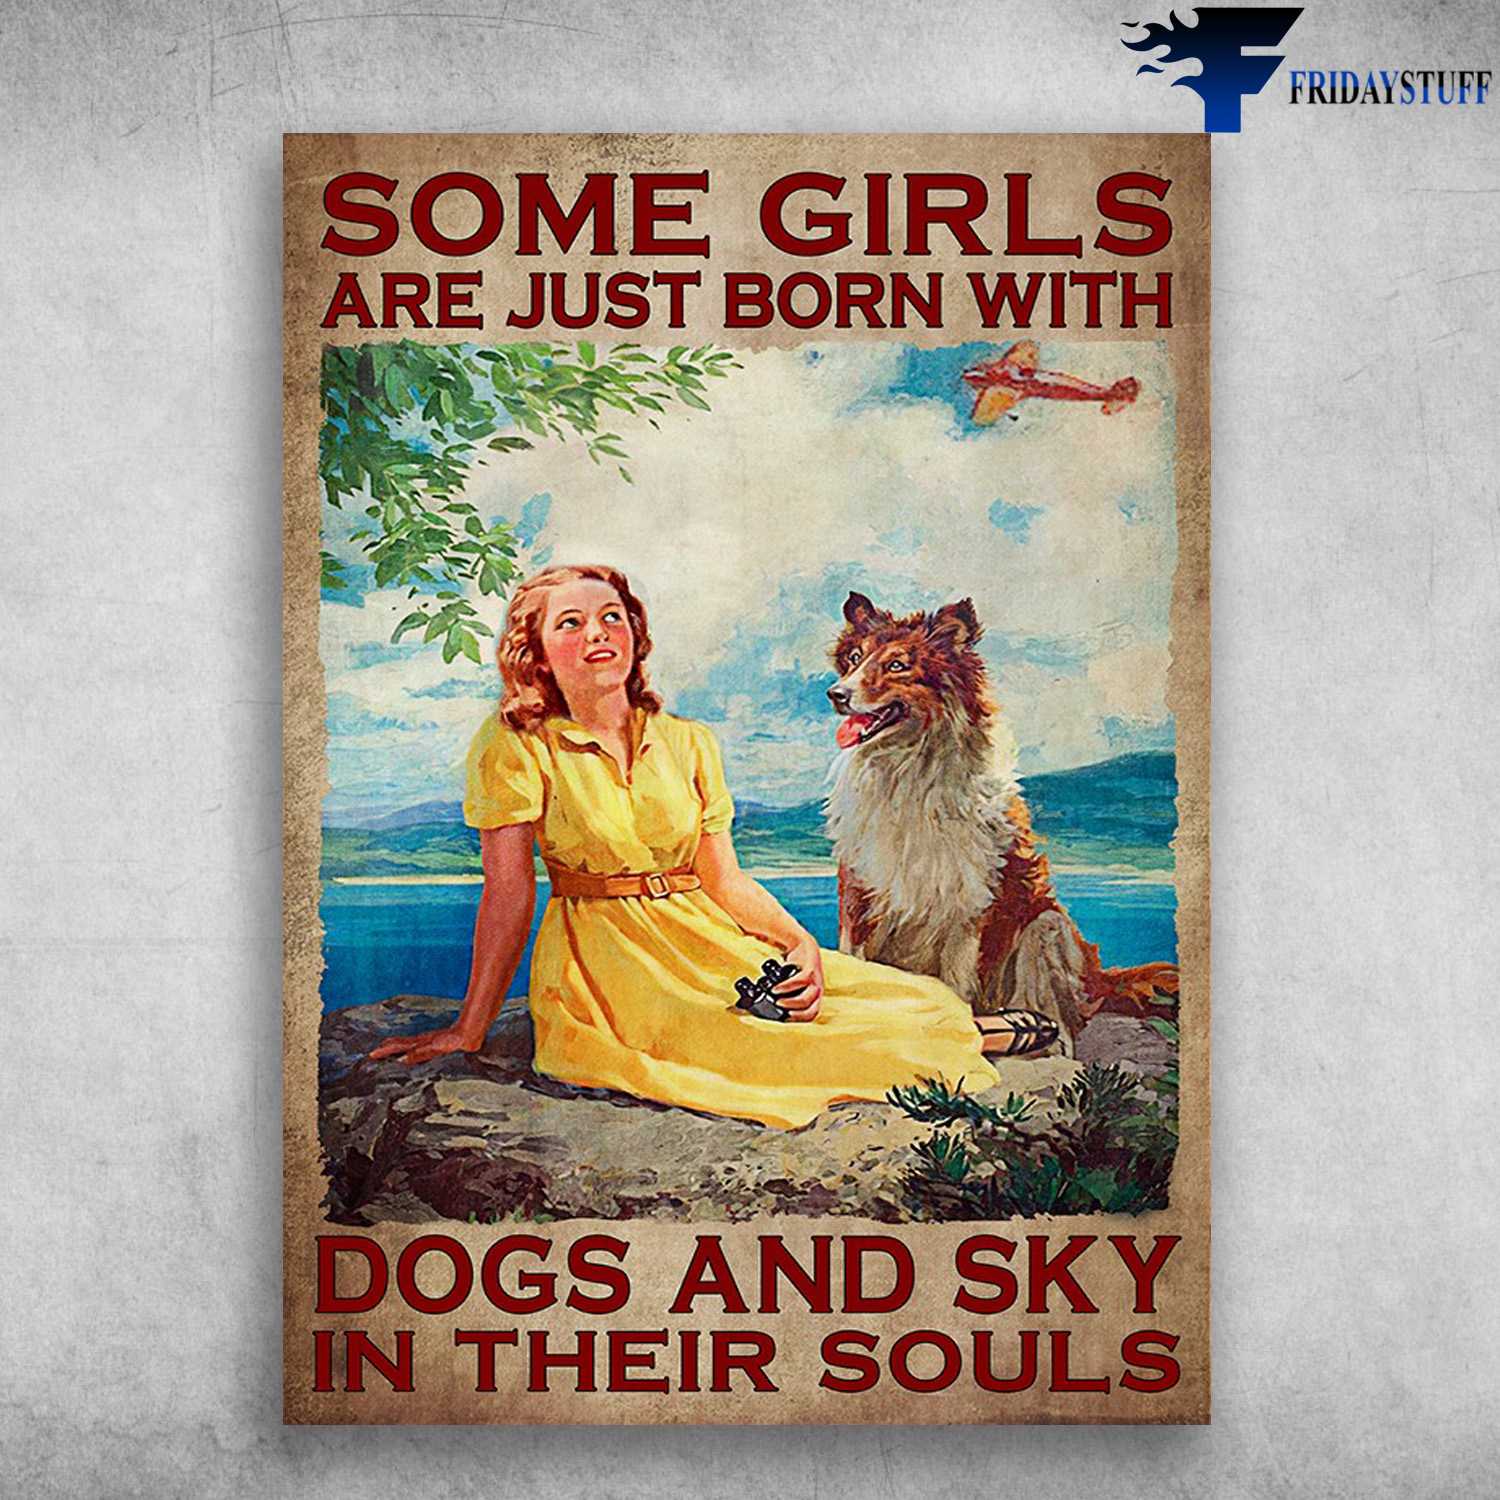 Airplane And Dog - Some Girls Are Just Born With, Dogs And Sky, In Their Soul, Dog Lover